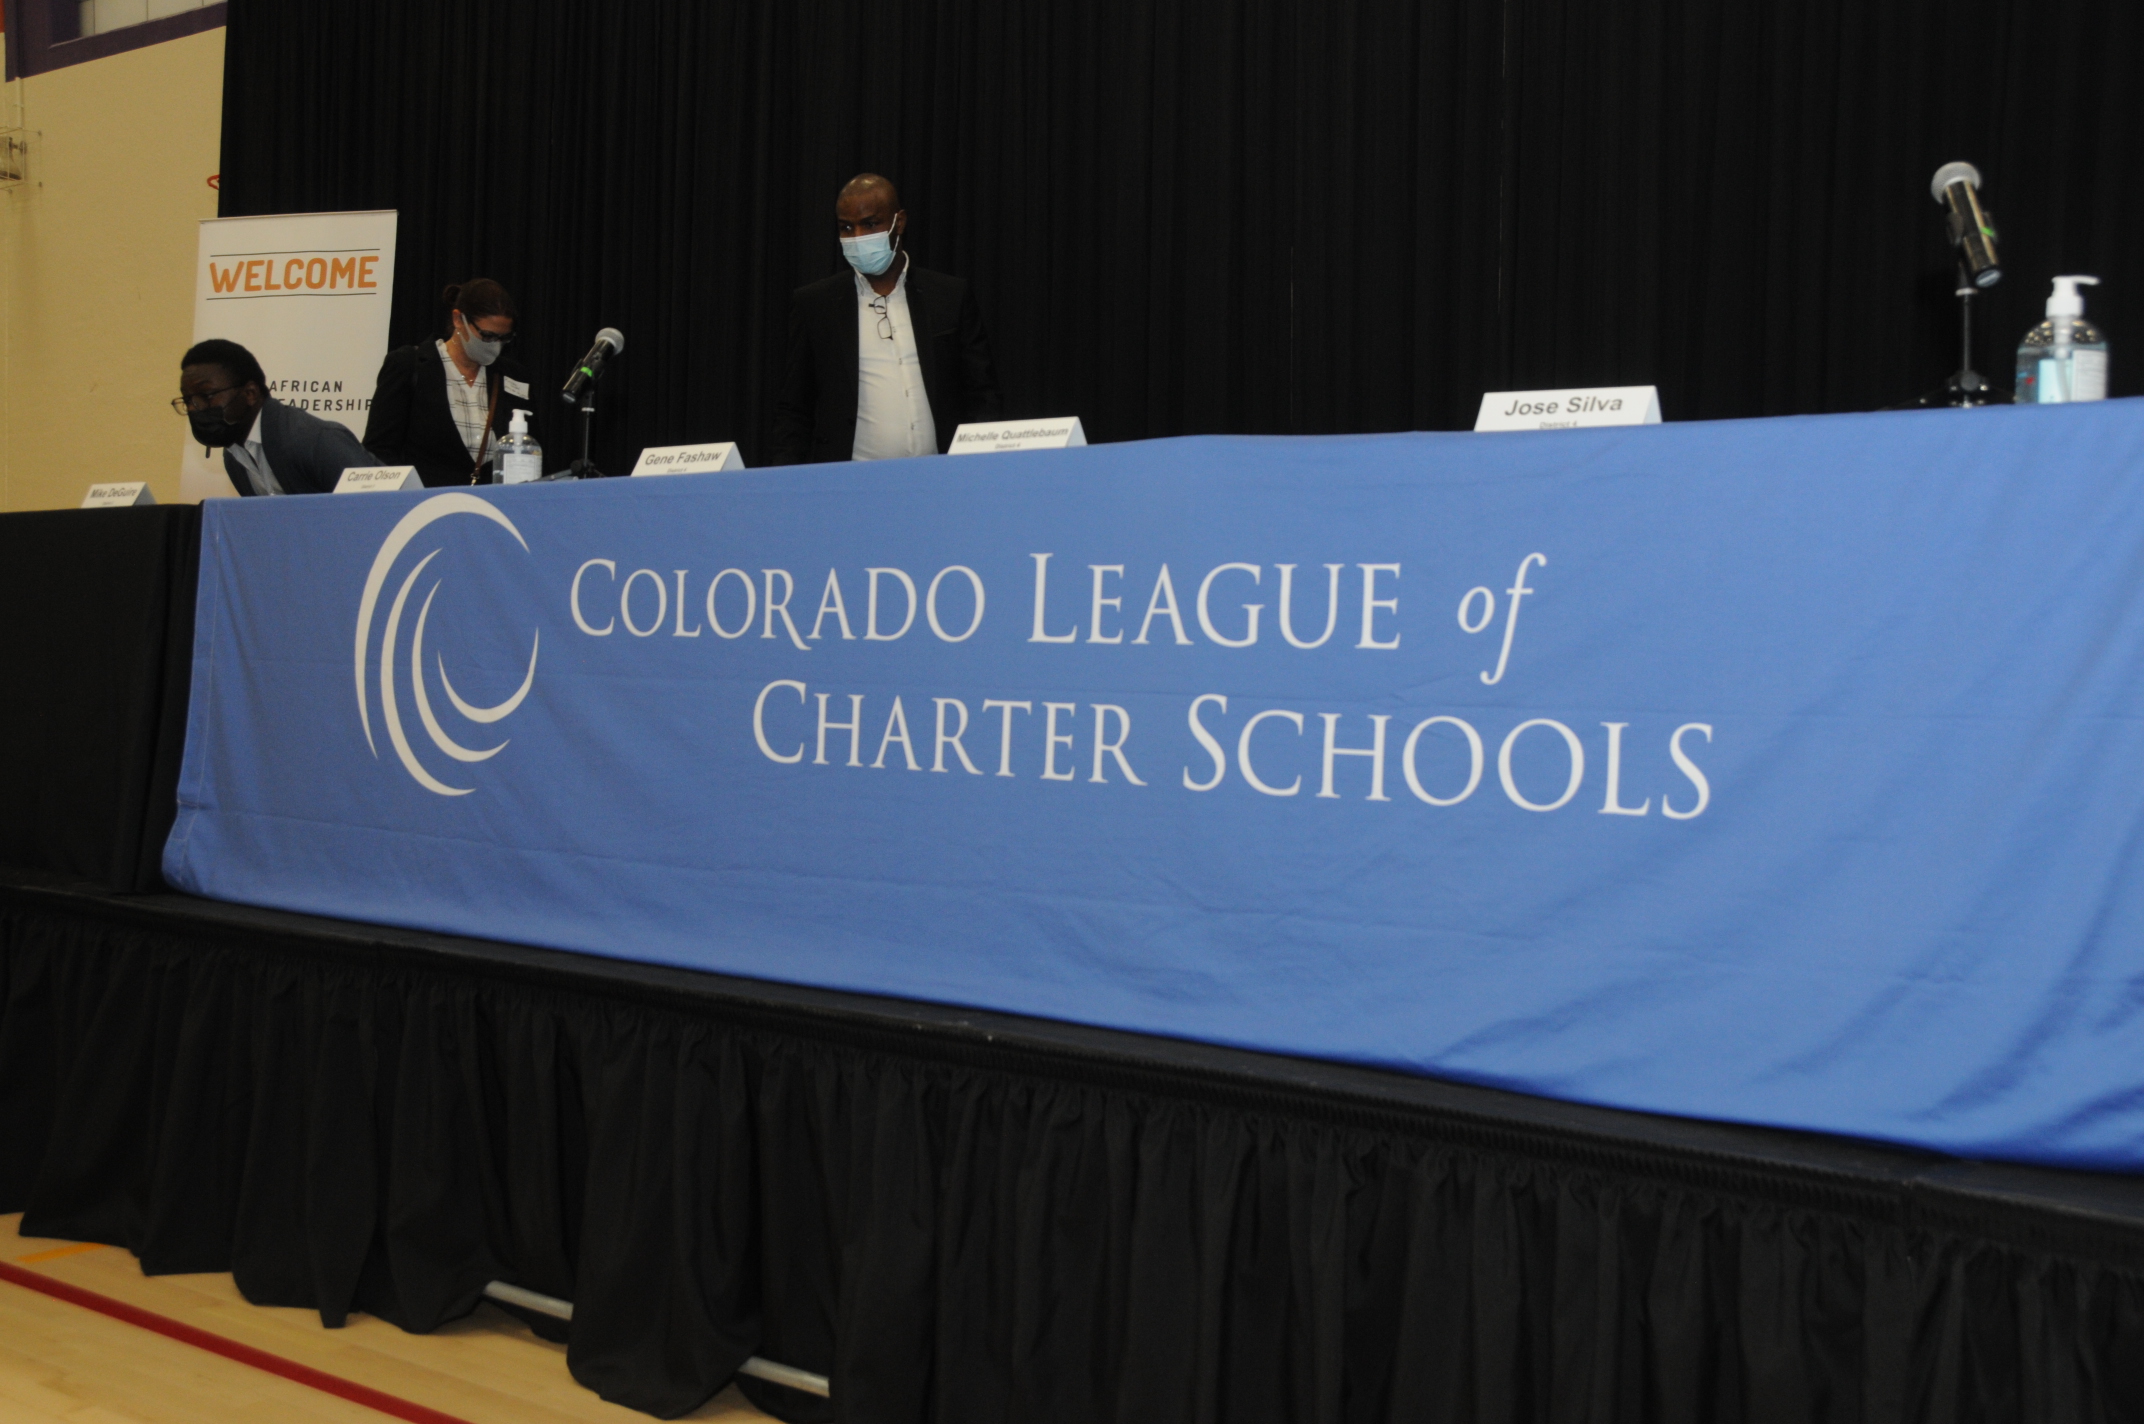 In 1994, the Colorado League of Charter Schools was founded to provide